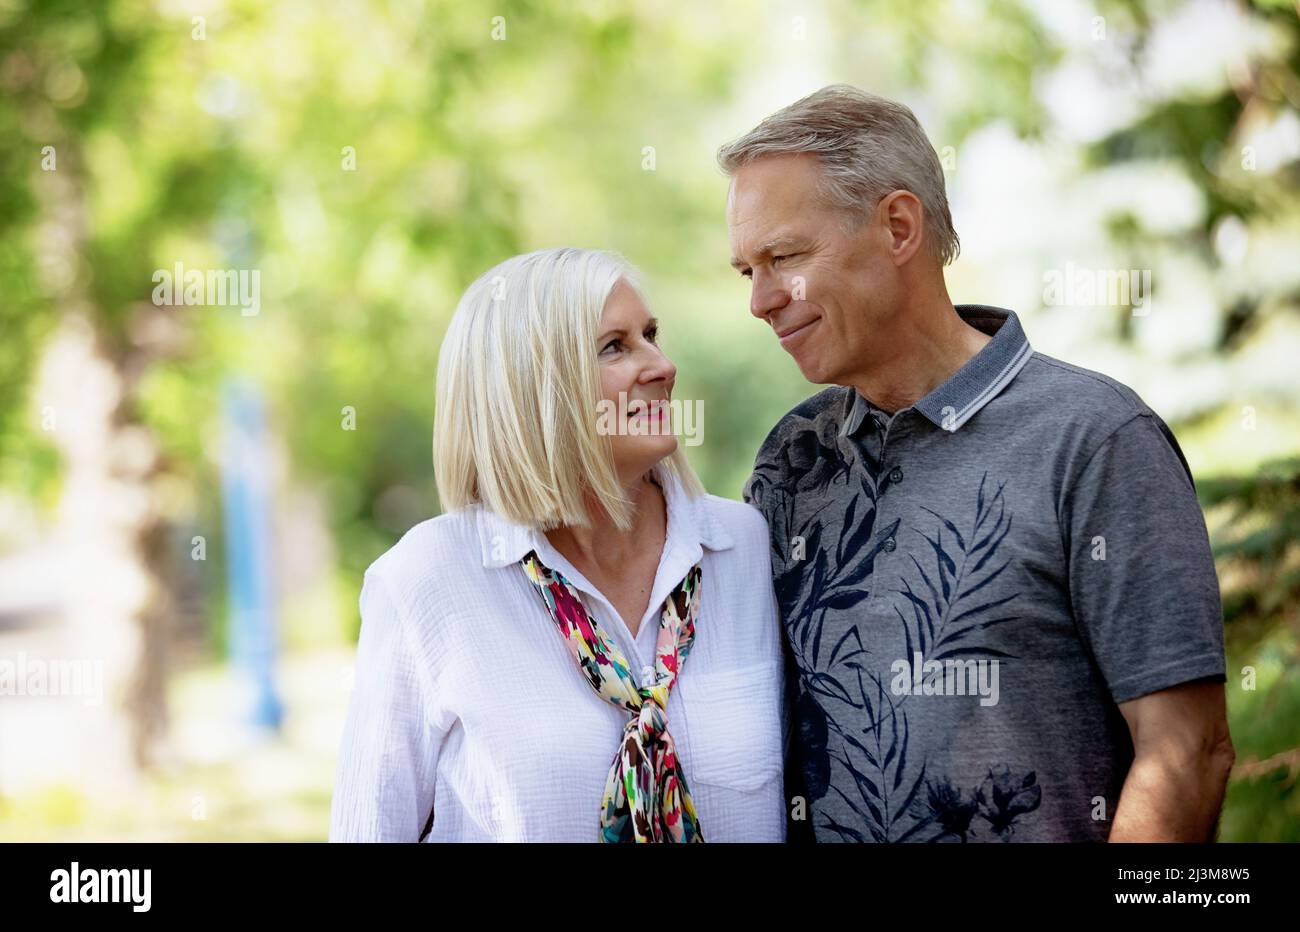 Outdoor portrait of a mature couple in a park as they stand and look at each other; Edmonton, Alberta, Canada Stock Photo